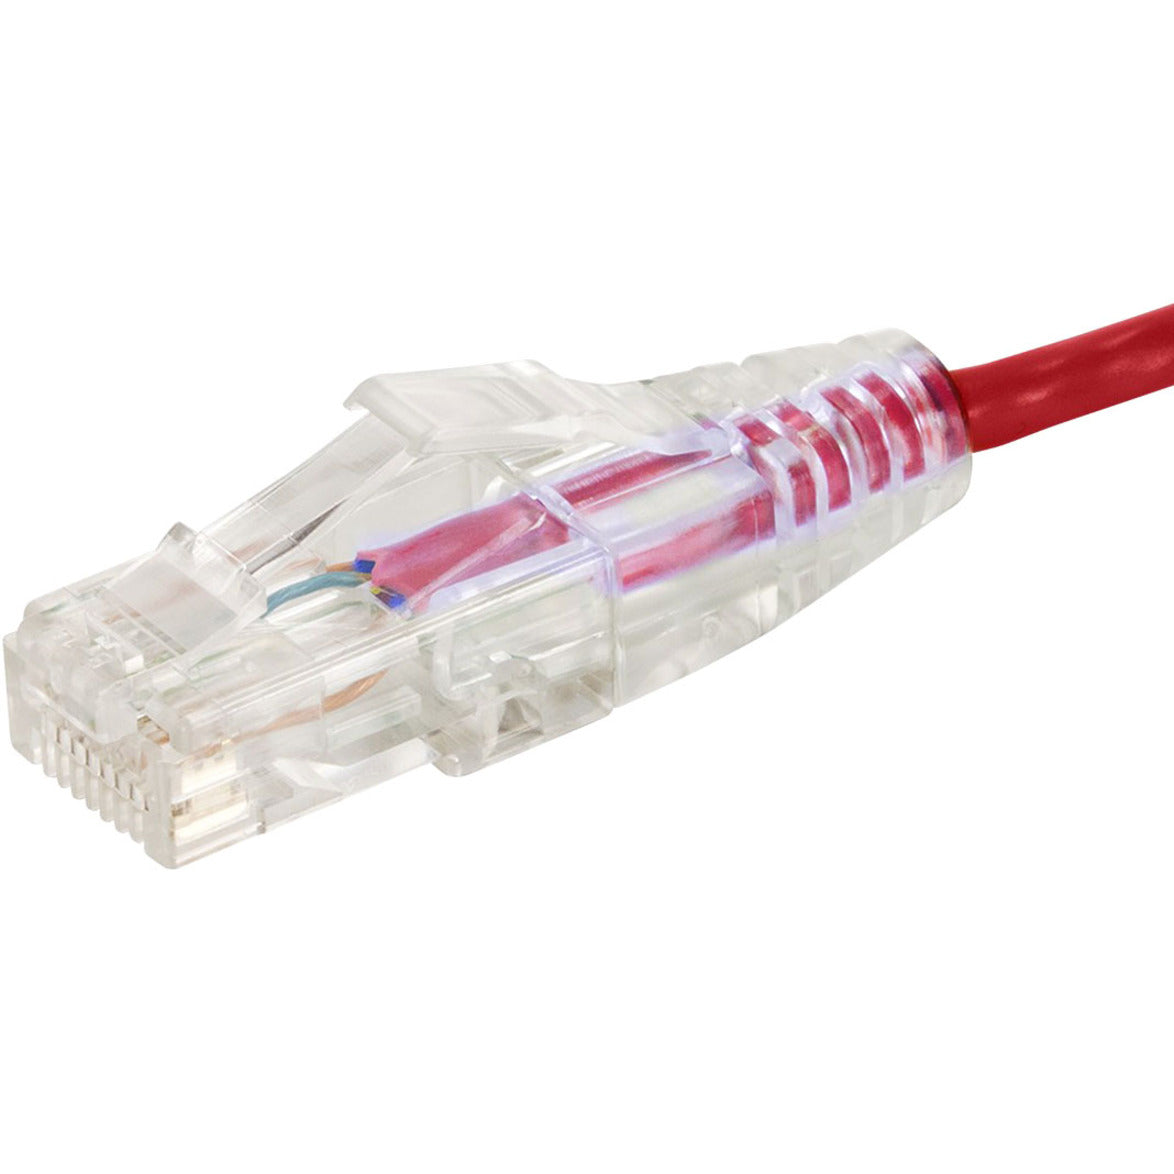 Monoprice 14785 SlimRun Cat6 28AWG UTP Ethernet Network Cable, 0.5ft Red, Flexible, Snagless